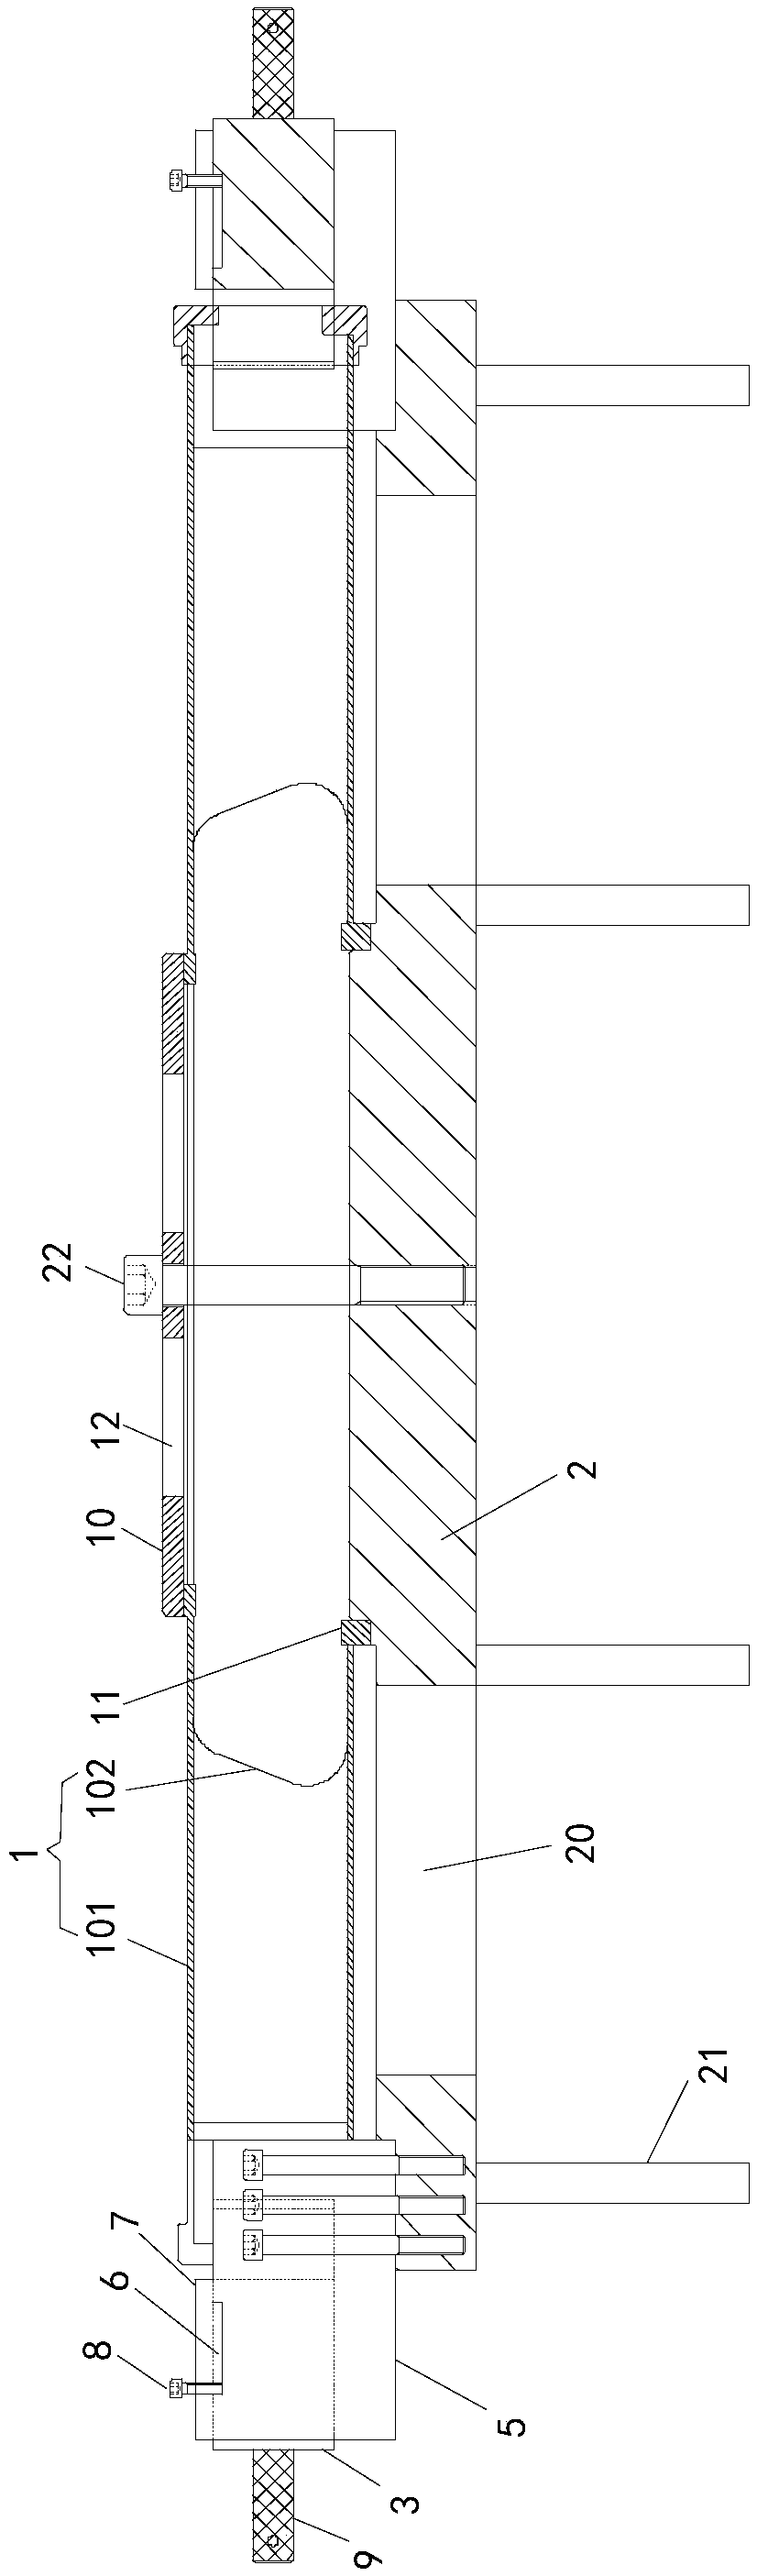 Integrated device for angular alignment and detection of turbine supporting casing support plates